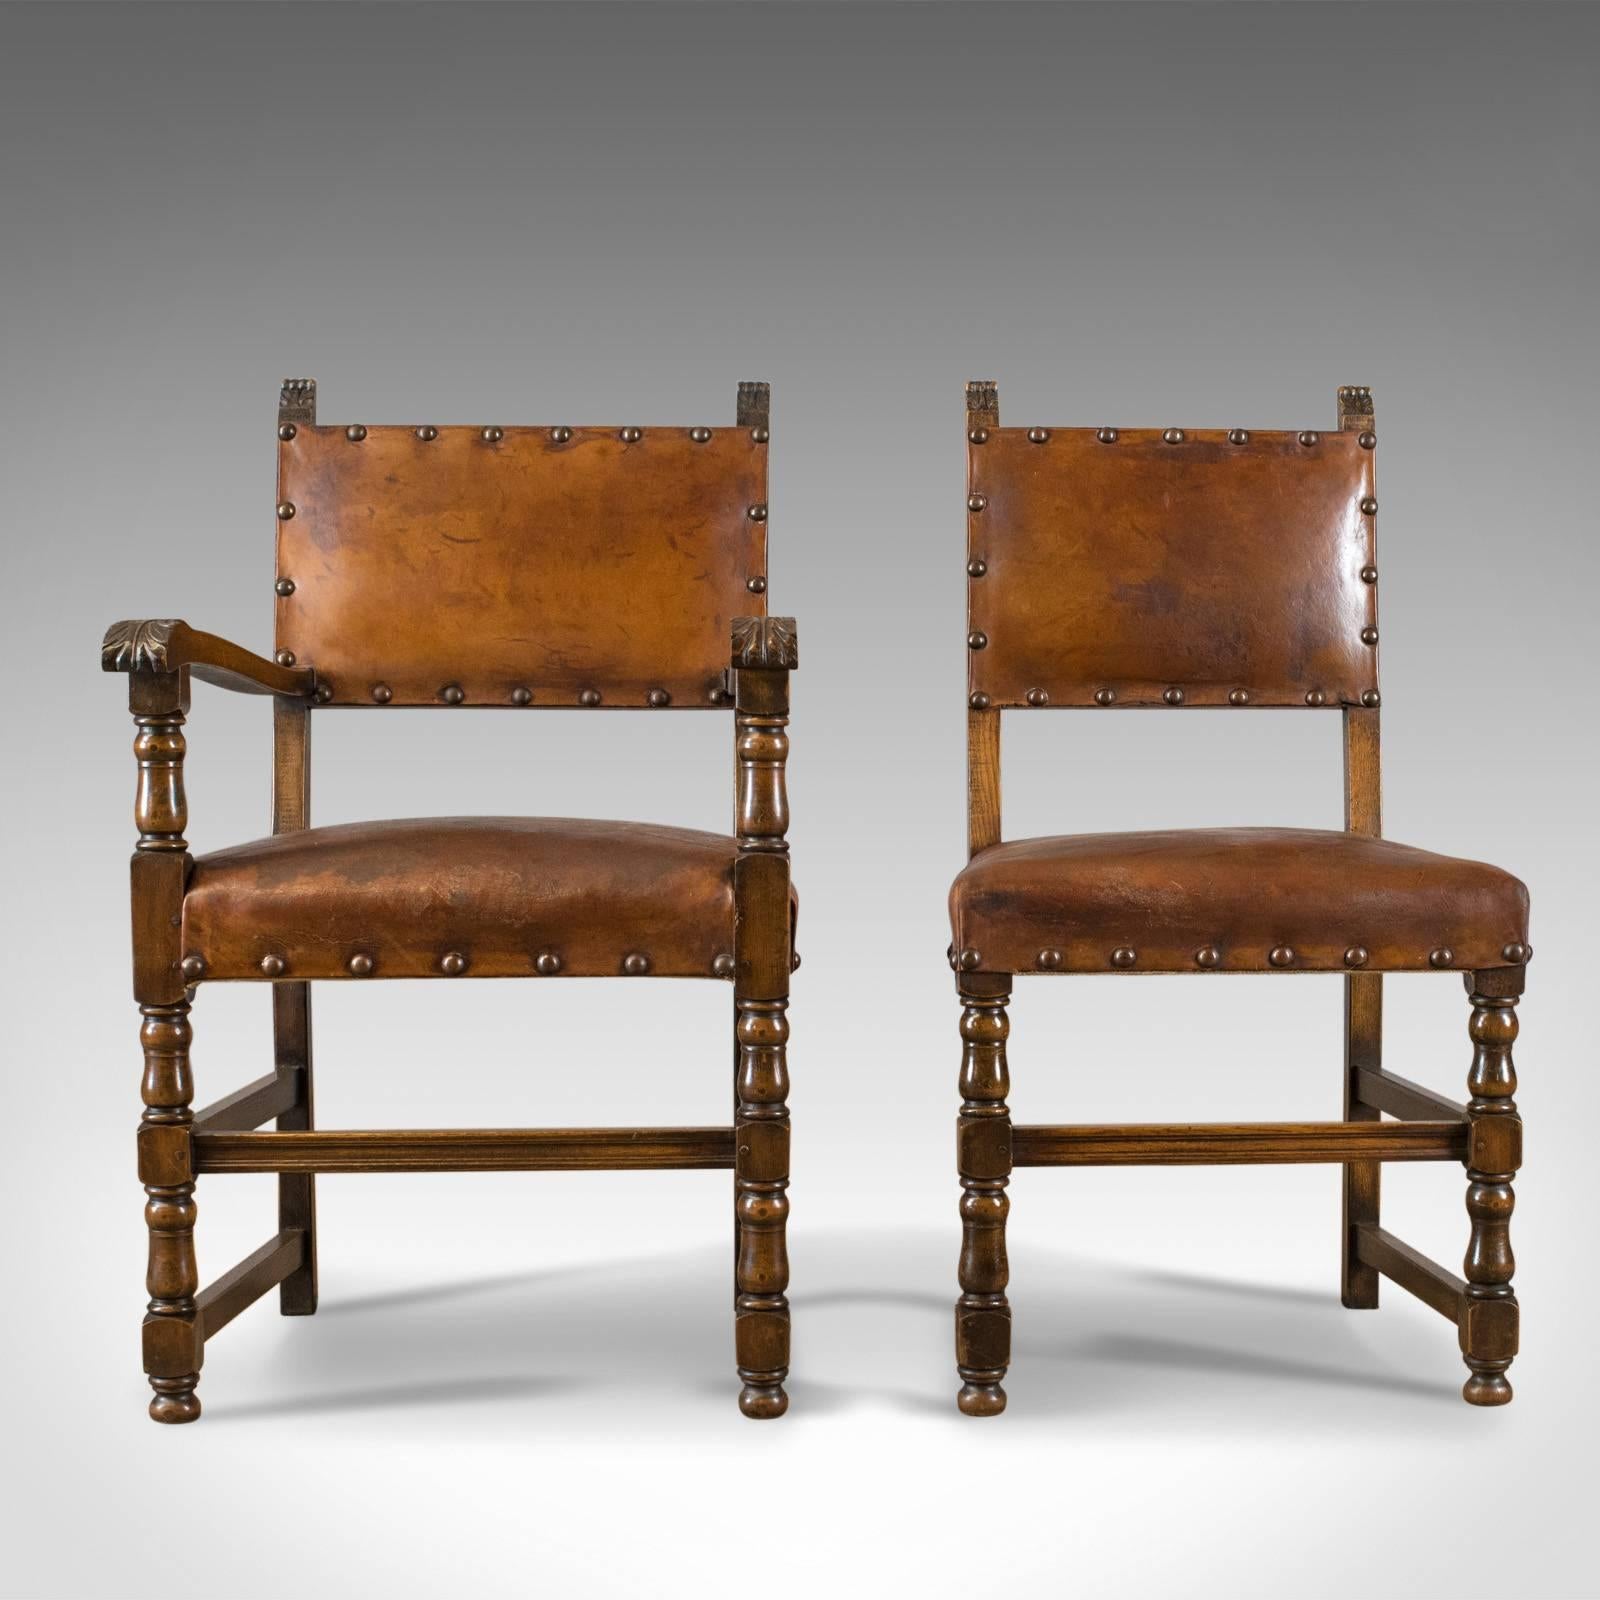 Jacobean Set of Six Antique Dining Chairs, Edwardian in 17th Century Taste, Oak Leather